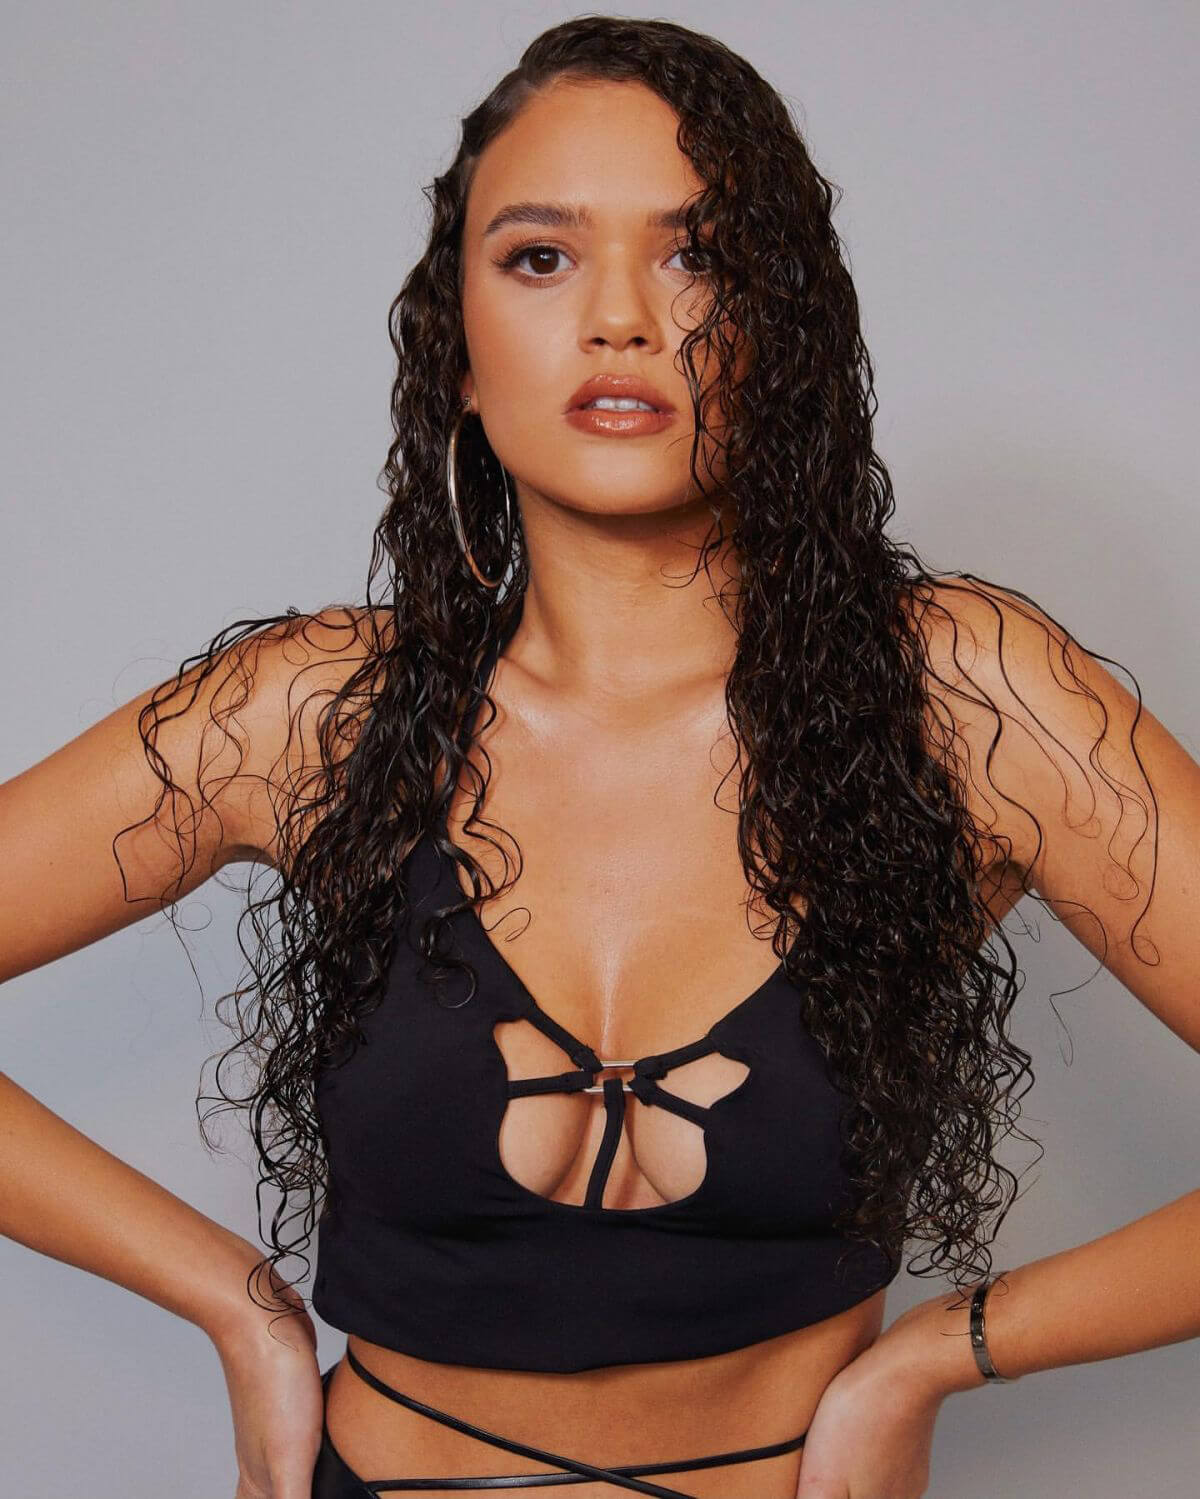 Madison Pettis Photoshoot for Mane Addicts, March 2021